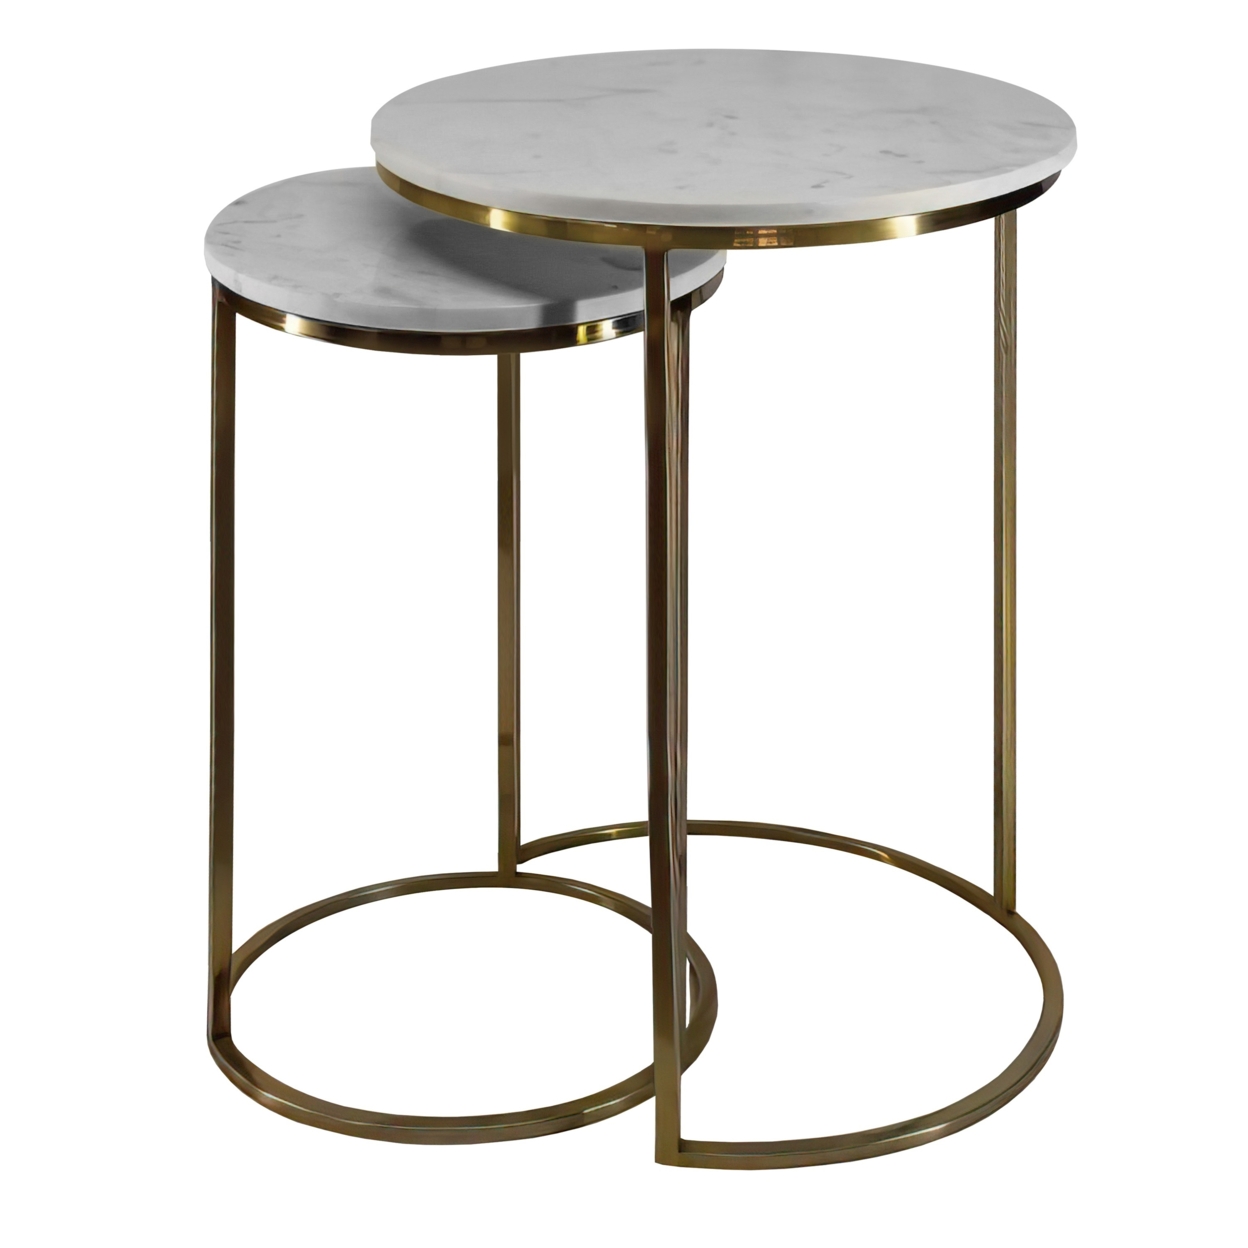 21, 18 Inch Transitional Style Round Marble Top Nesting End Table, Set Of 2, Metal Frame, White, Shiny Brass- Saltoro Sherpi